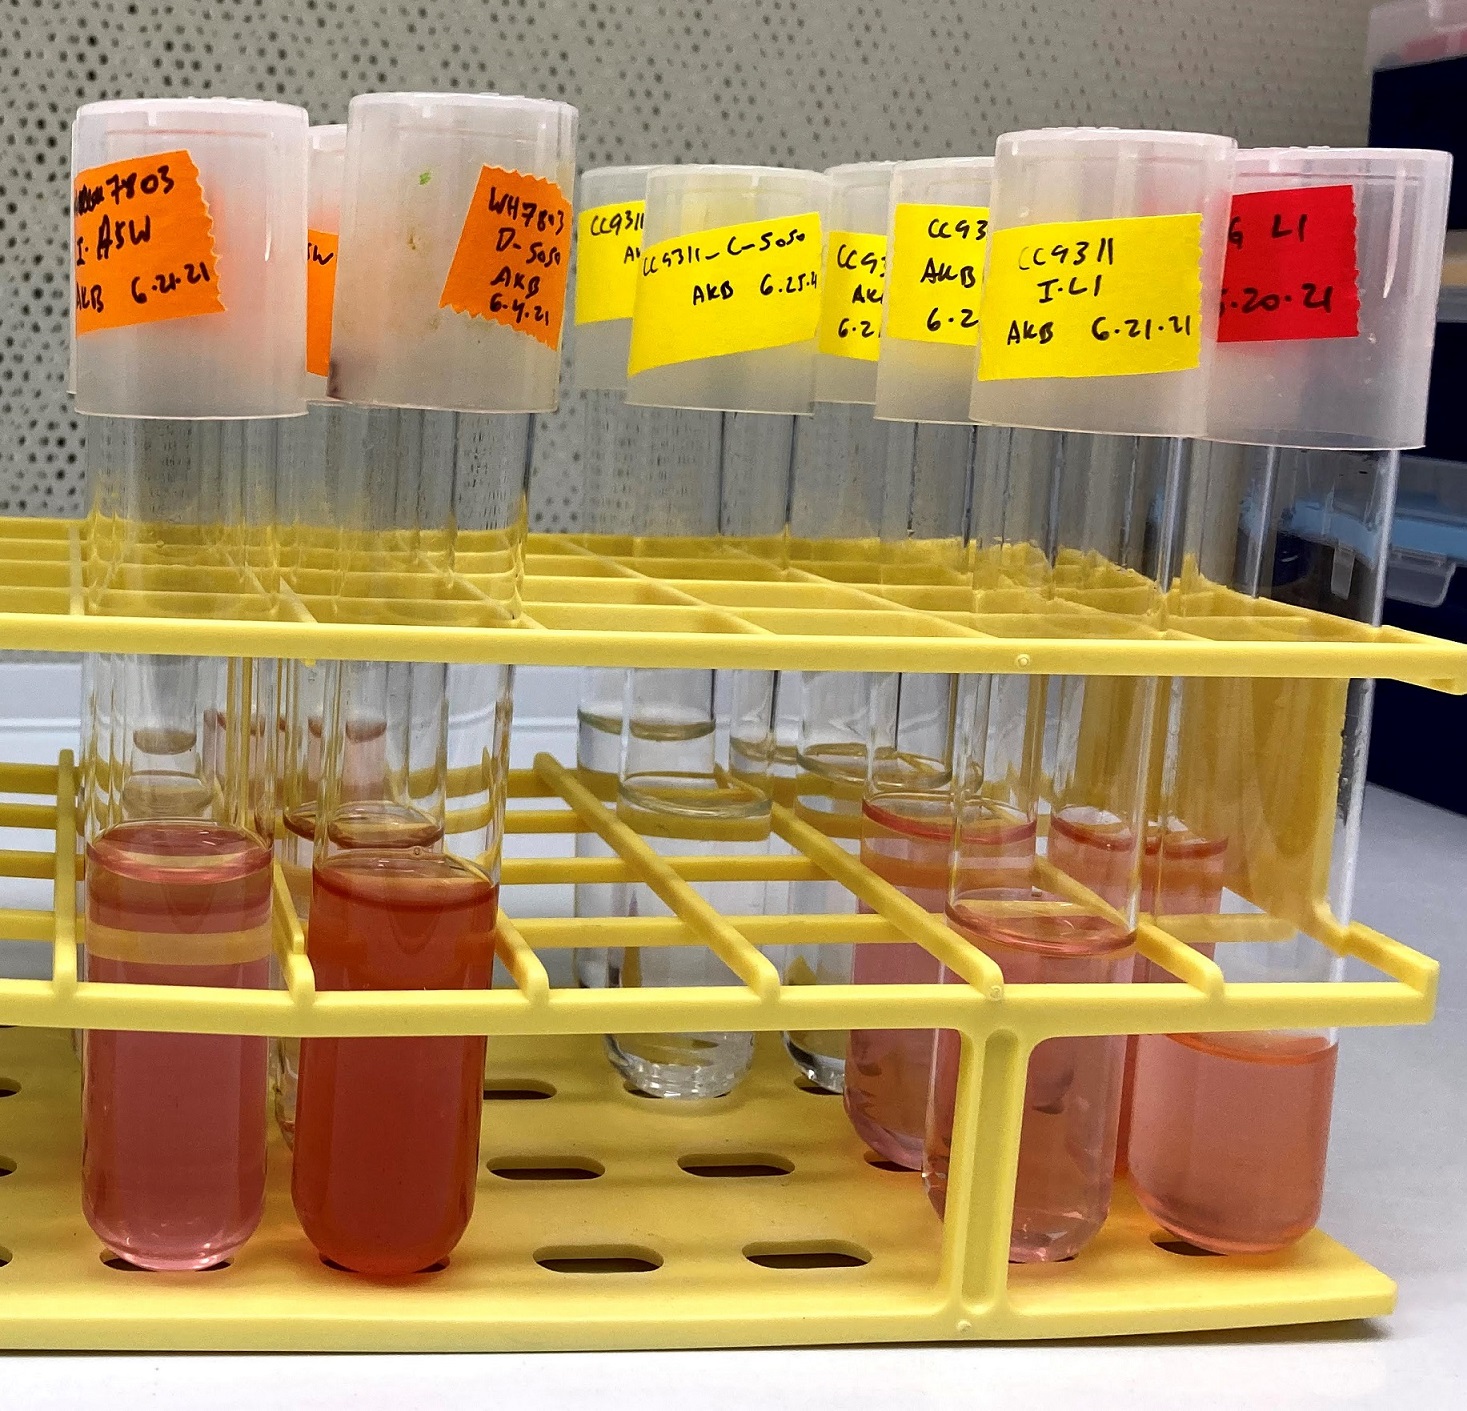 Synechococcus strains growing in the lab